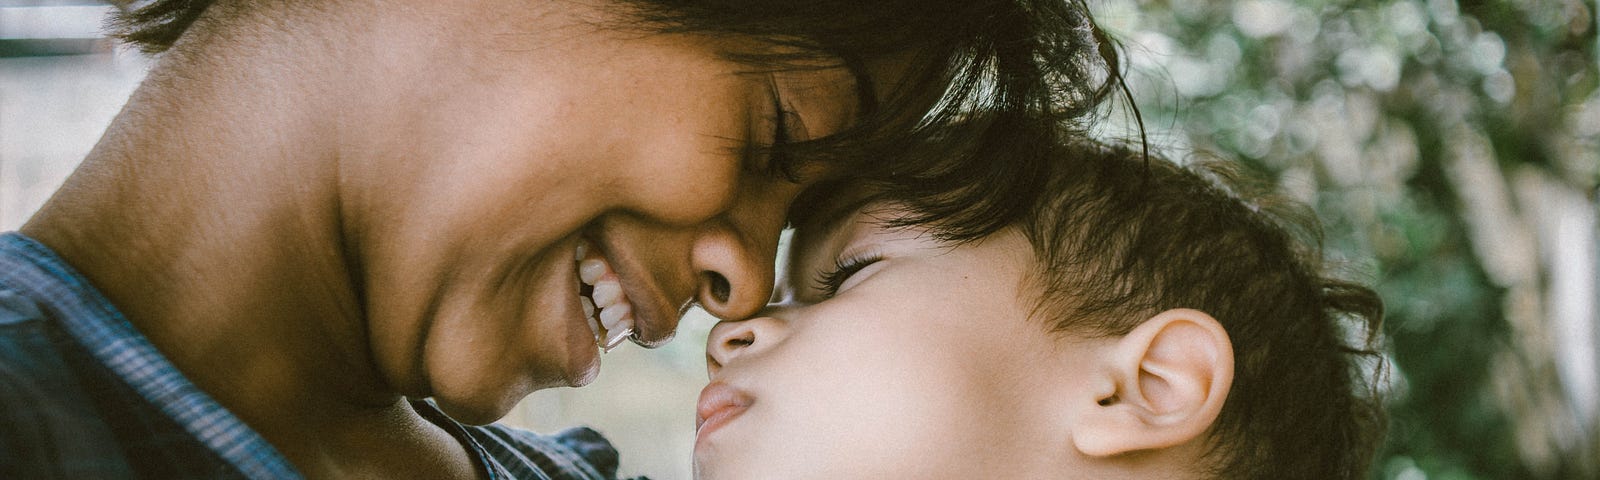 Picture of smiling woman nuzzling noses with a young boy.